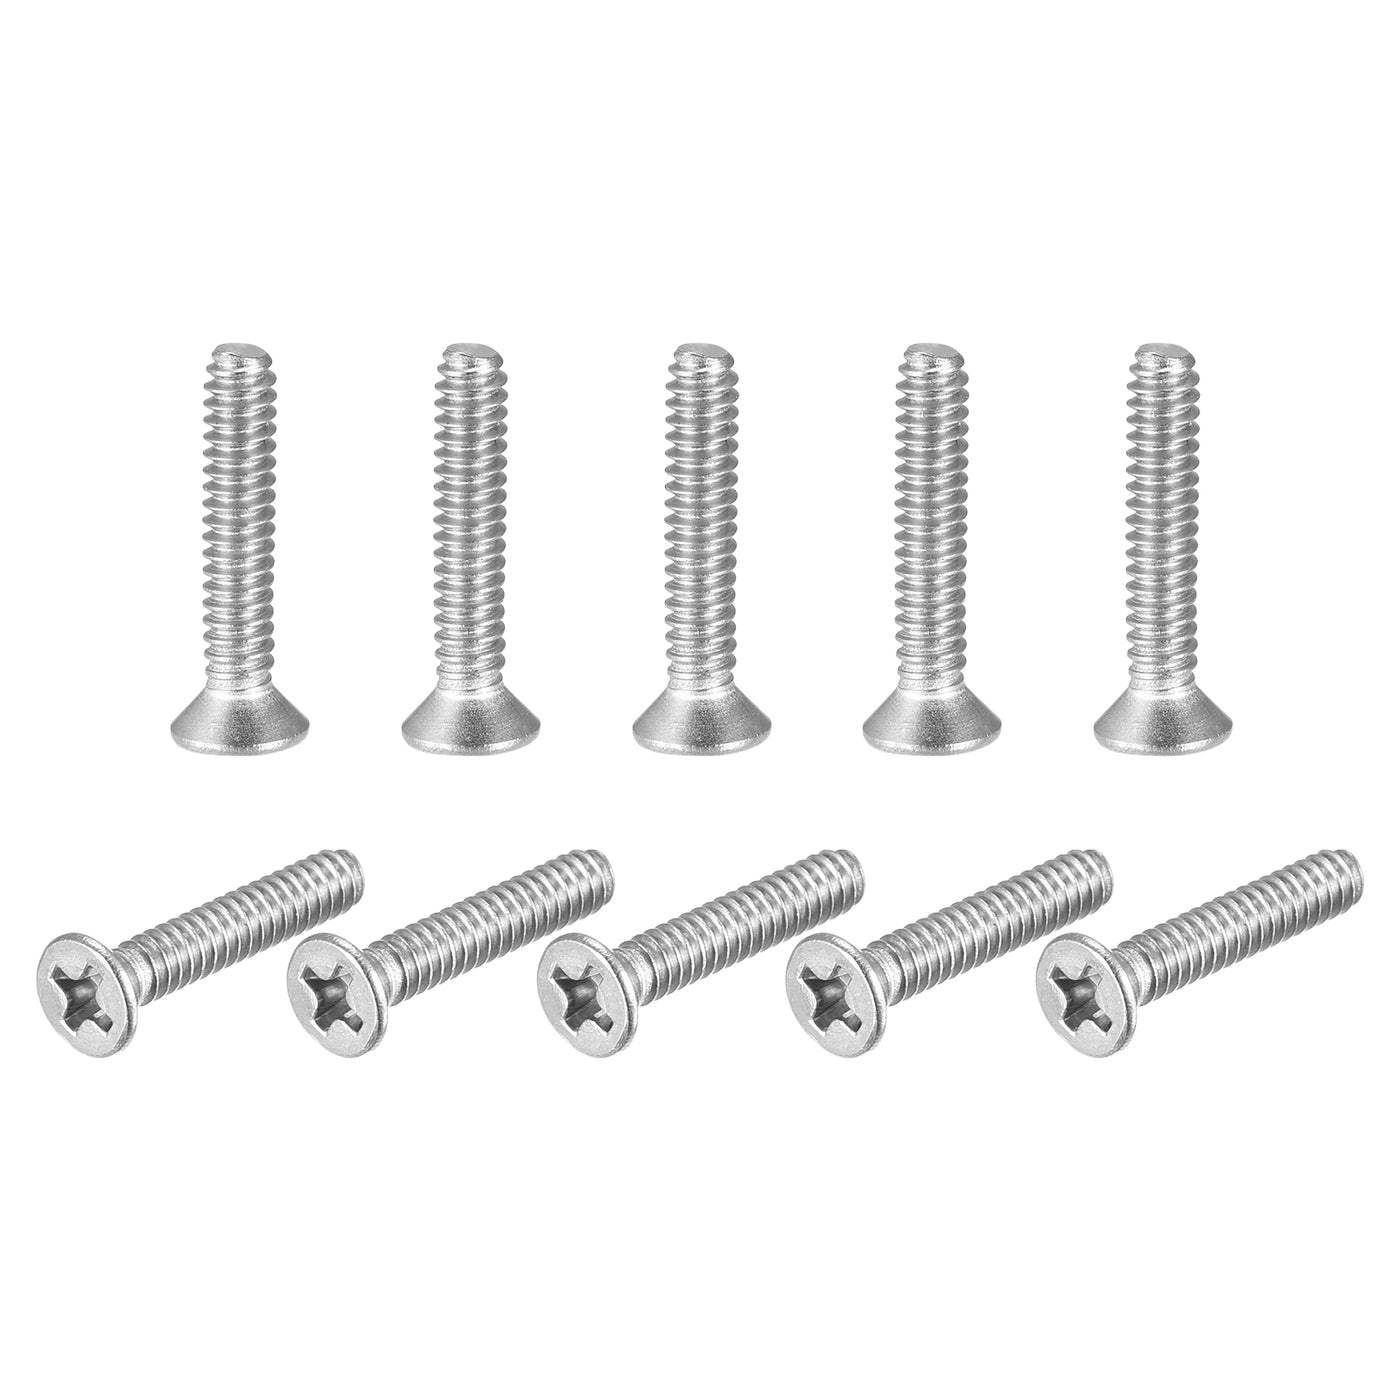 uxcell Uxcell 6#-32x3/4" Flat Head Machine Screws Phillips 304 Stainless Steel Bolts 50pcs